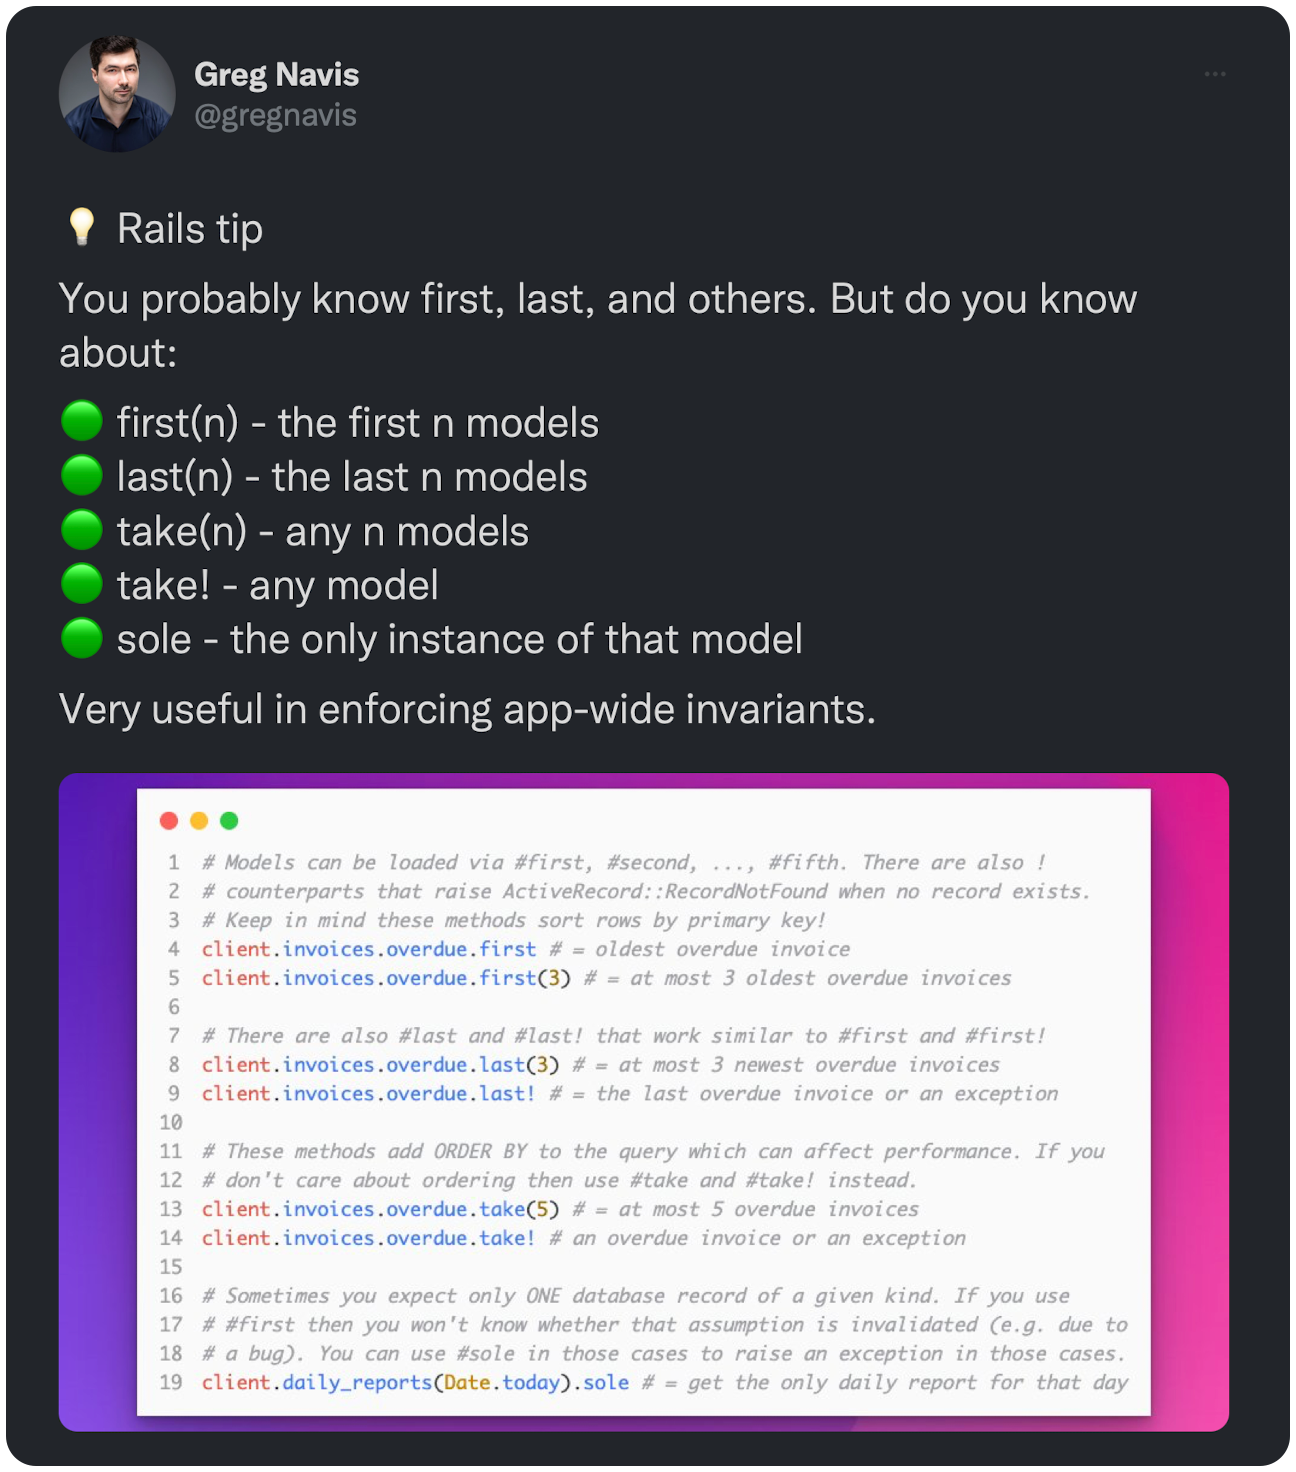 💡 Rails tip You probably know first, last, and others. But do you know about: 🟢 first(n) - the first n models 🟢 last(n) - the last n models 🟢 take(n) - any n models 🟢 take! - any model 🟢 sole - the only instance of that model Very useful in enforcing app-wide invariants.